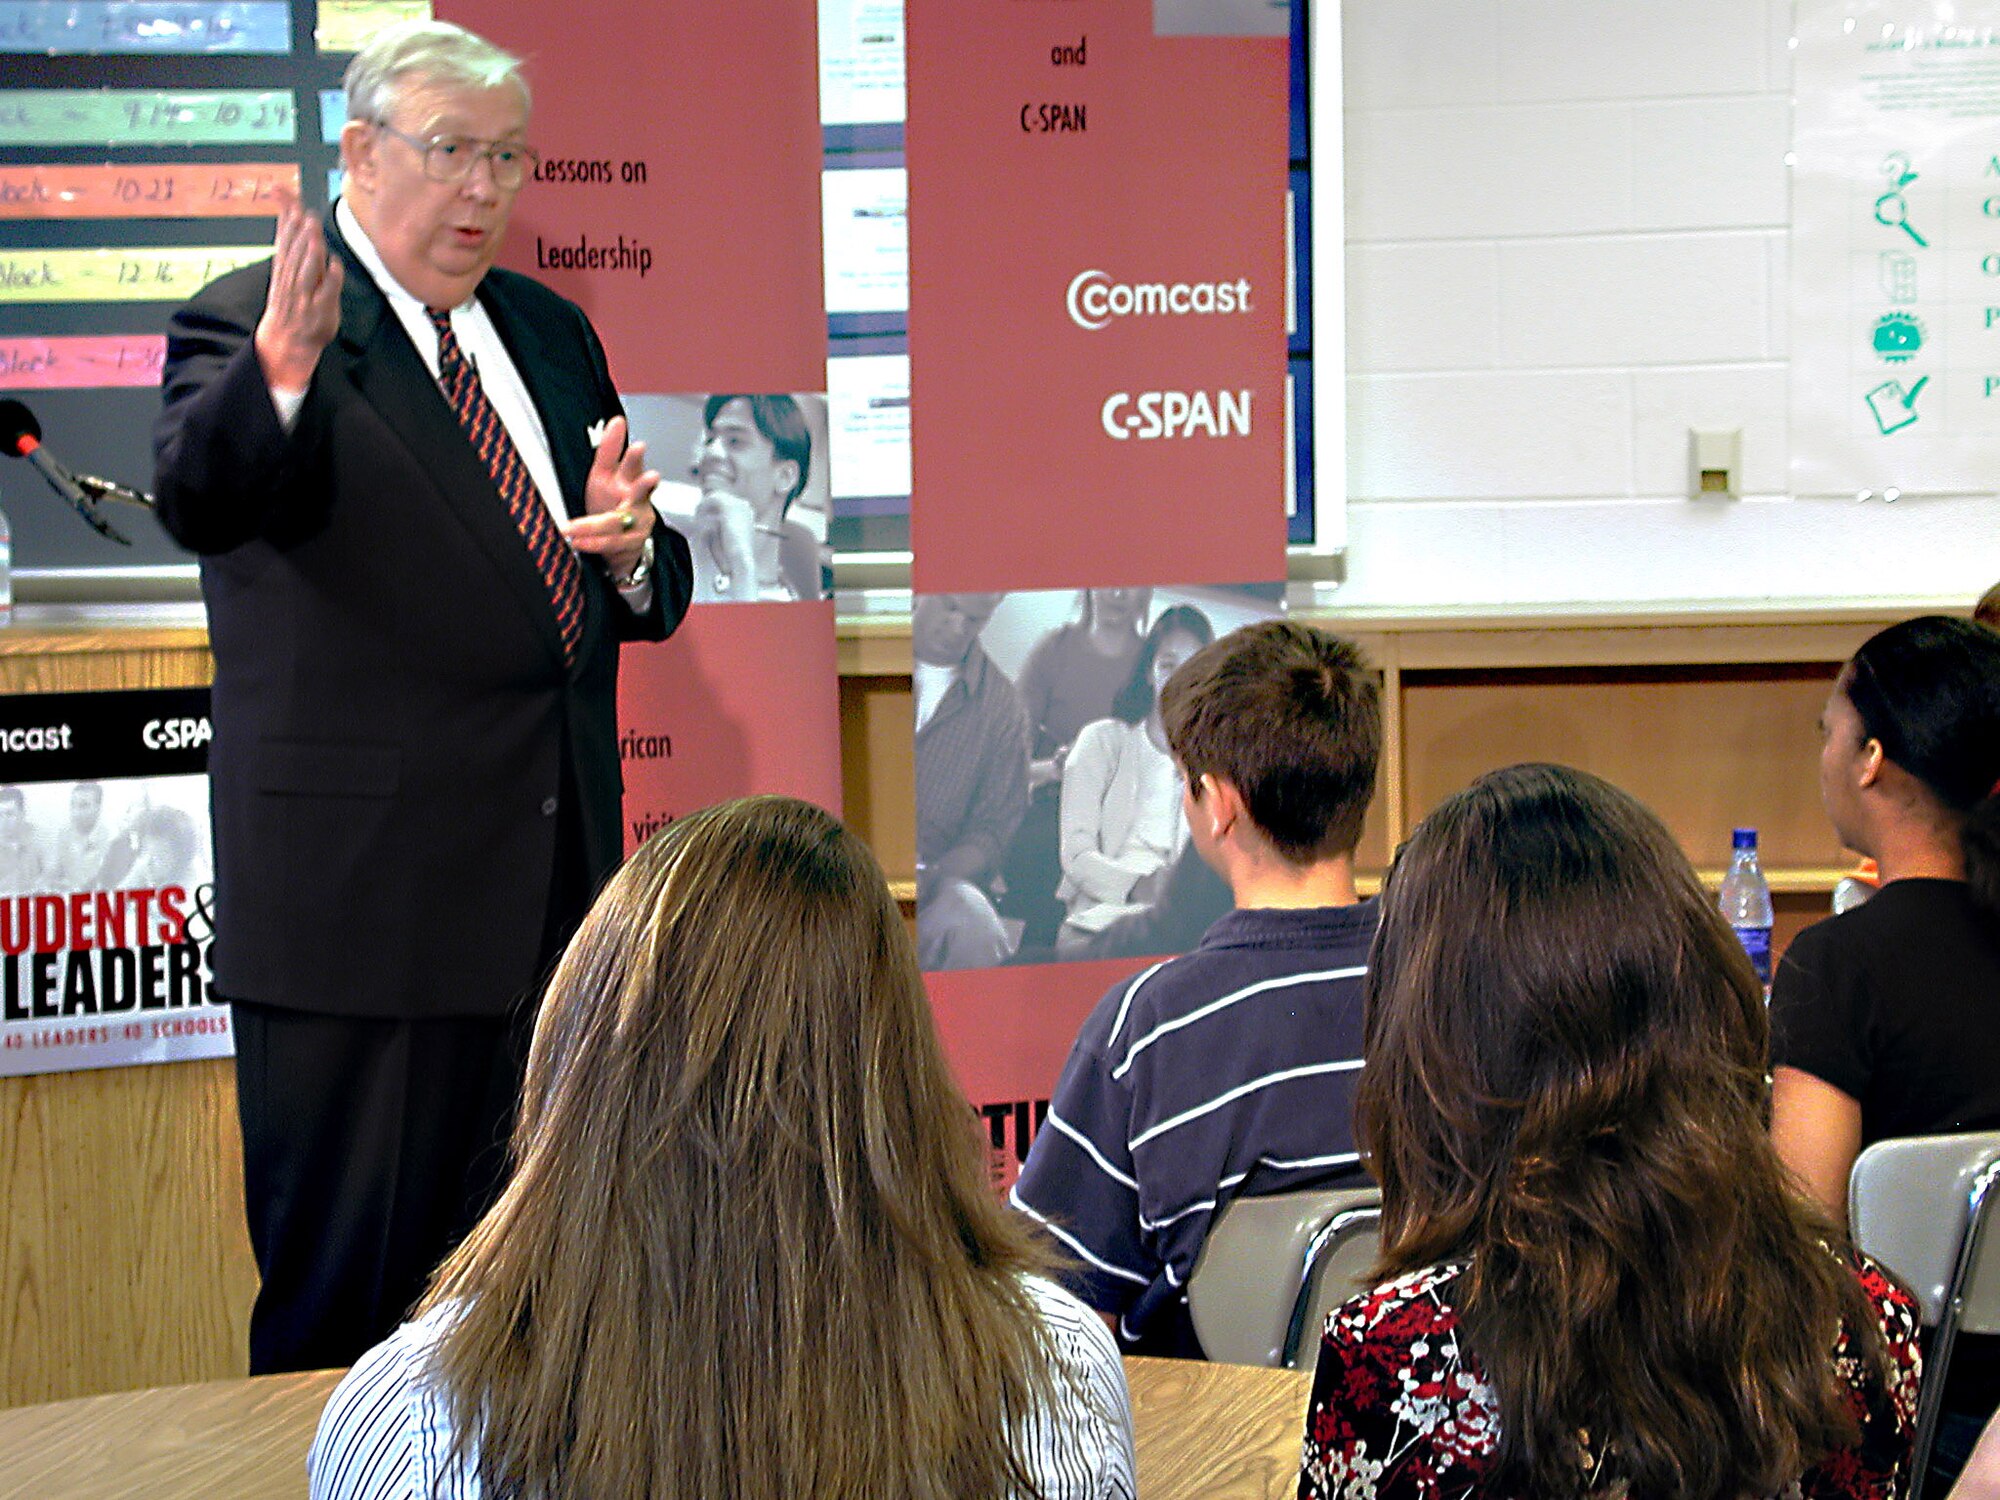 BETHESDA, Md. -- Secretary of the Air Force Dr. James G. Roche speaks to an eighth-grade history class here about leadership, the Air Force, public service and current events.  (U.S. Air Force photo by Staff Sgt. A. J. Bosker)